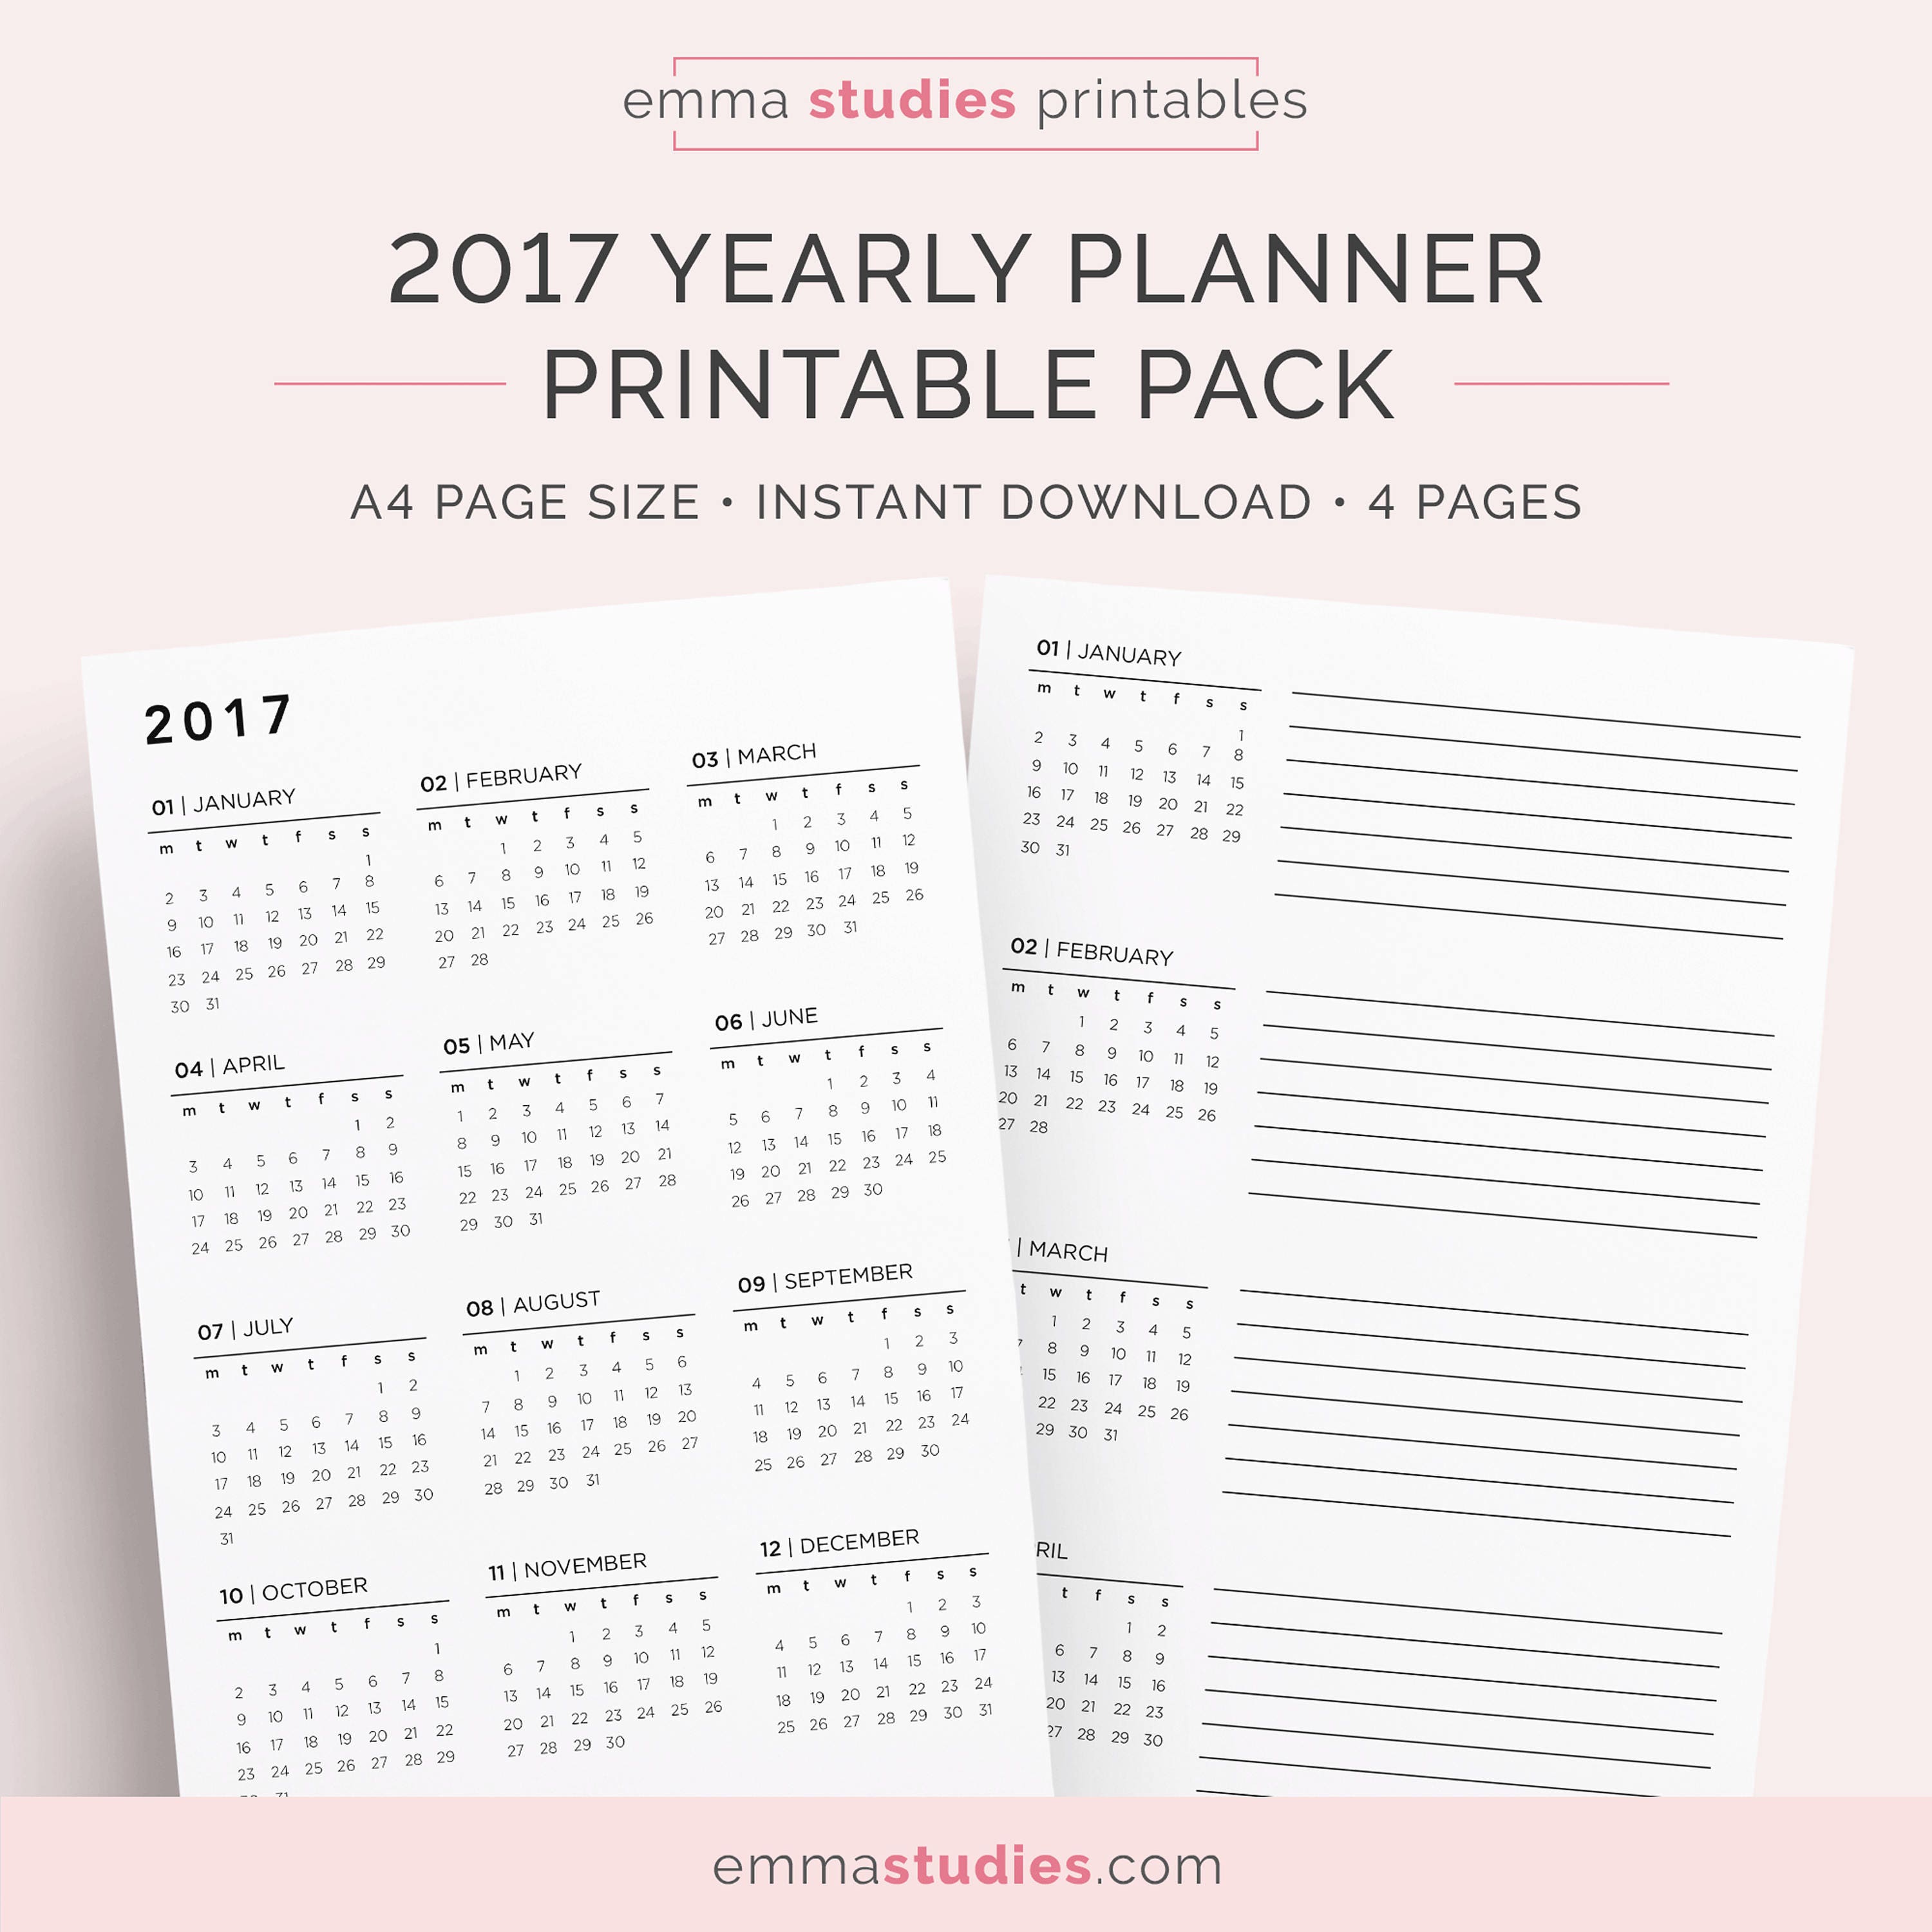 2017 yearly calendar overview and planner printable pack